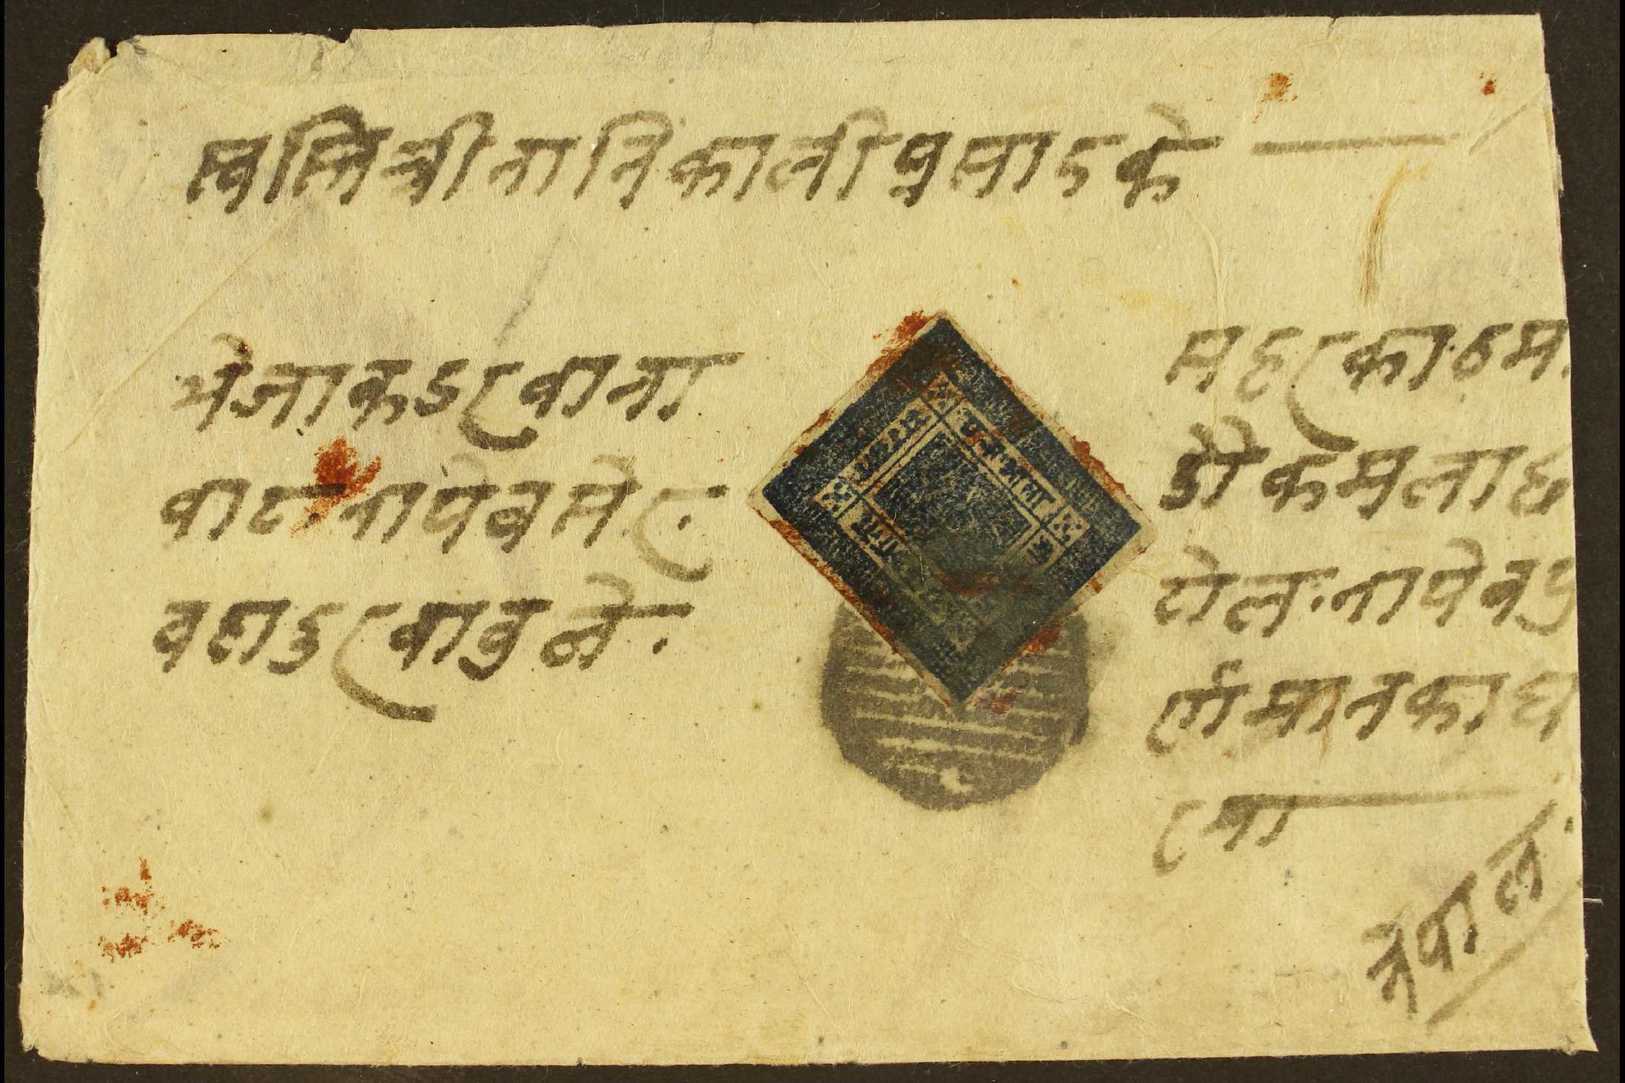 1891  (24th Feb) 1a Blue, Imperf, Blurred Impression On Cover, SG 10, Used On Cover From Kadarban To Kathmandu. For More - Nepal